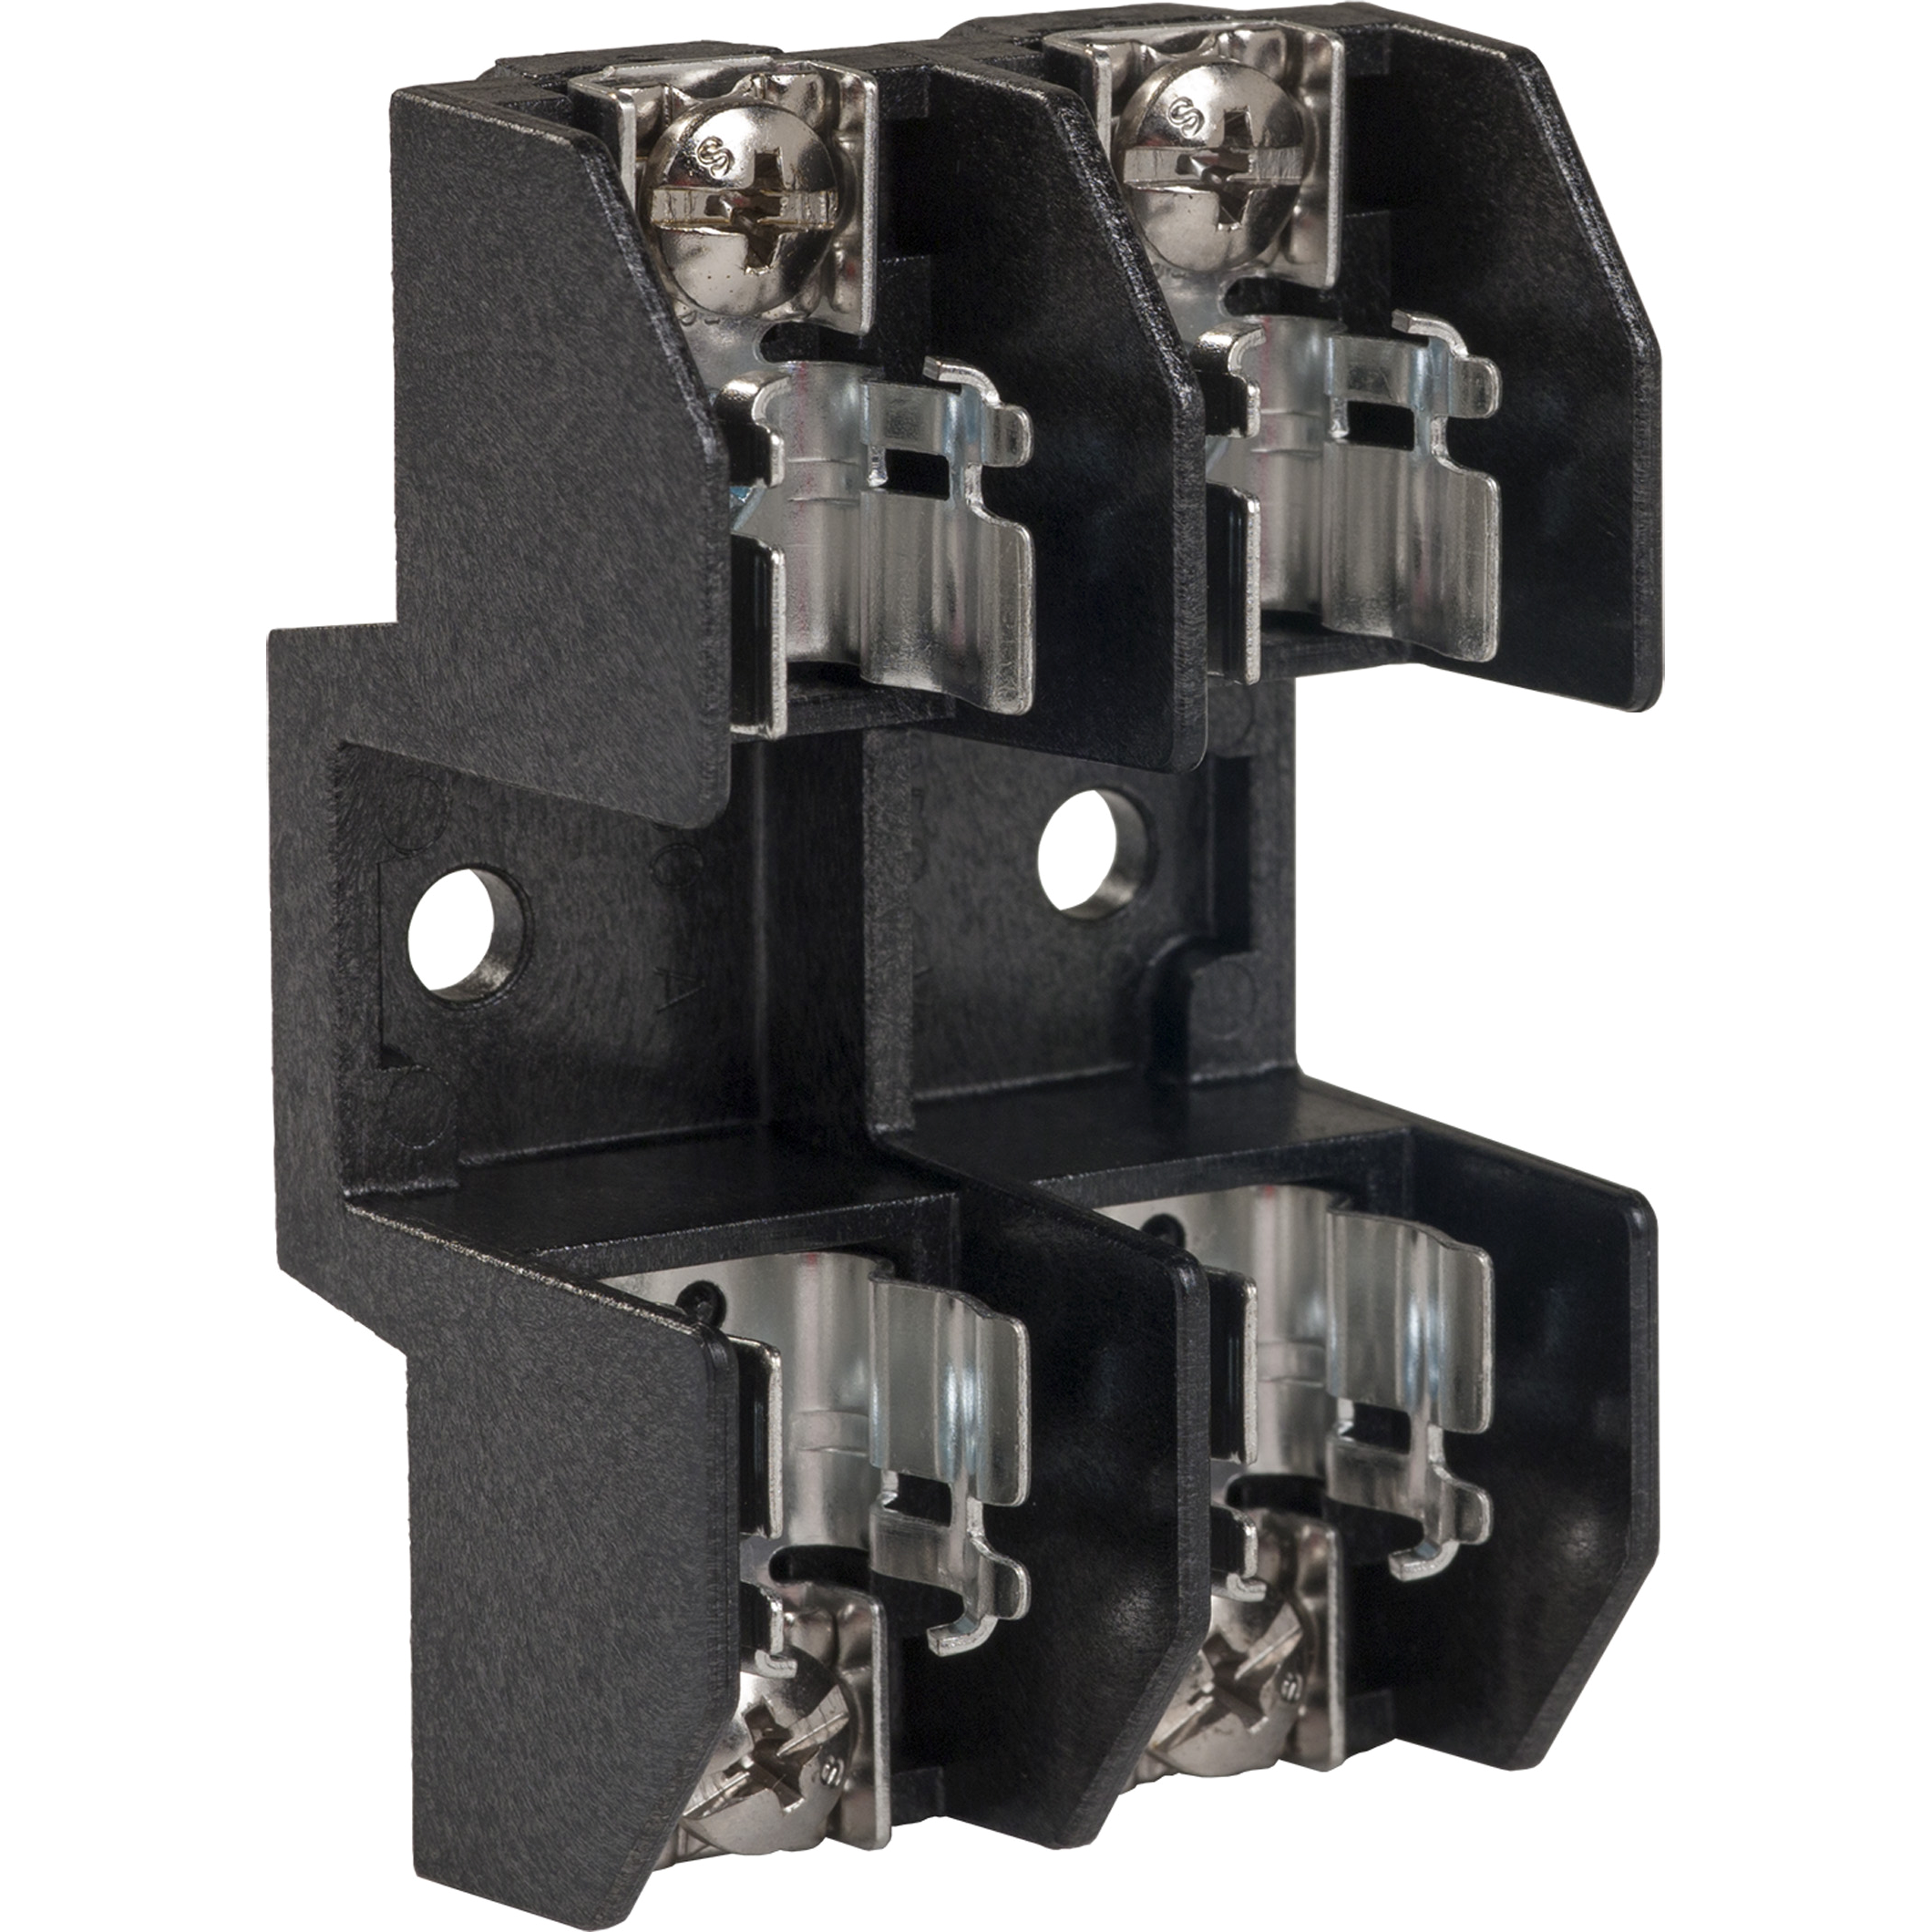 Terminal block, Linergy, fuse holder, Class H, 30A, 250V, 2 pole